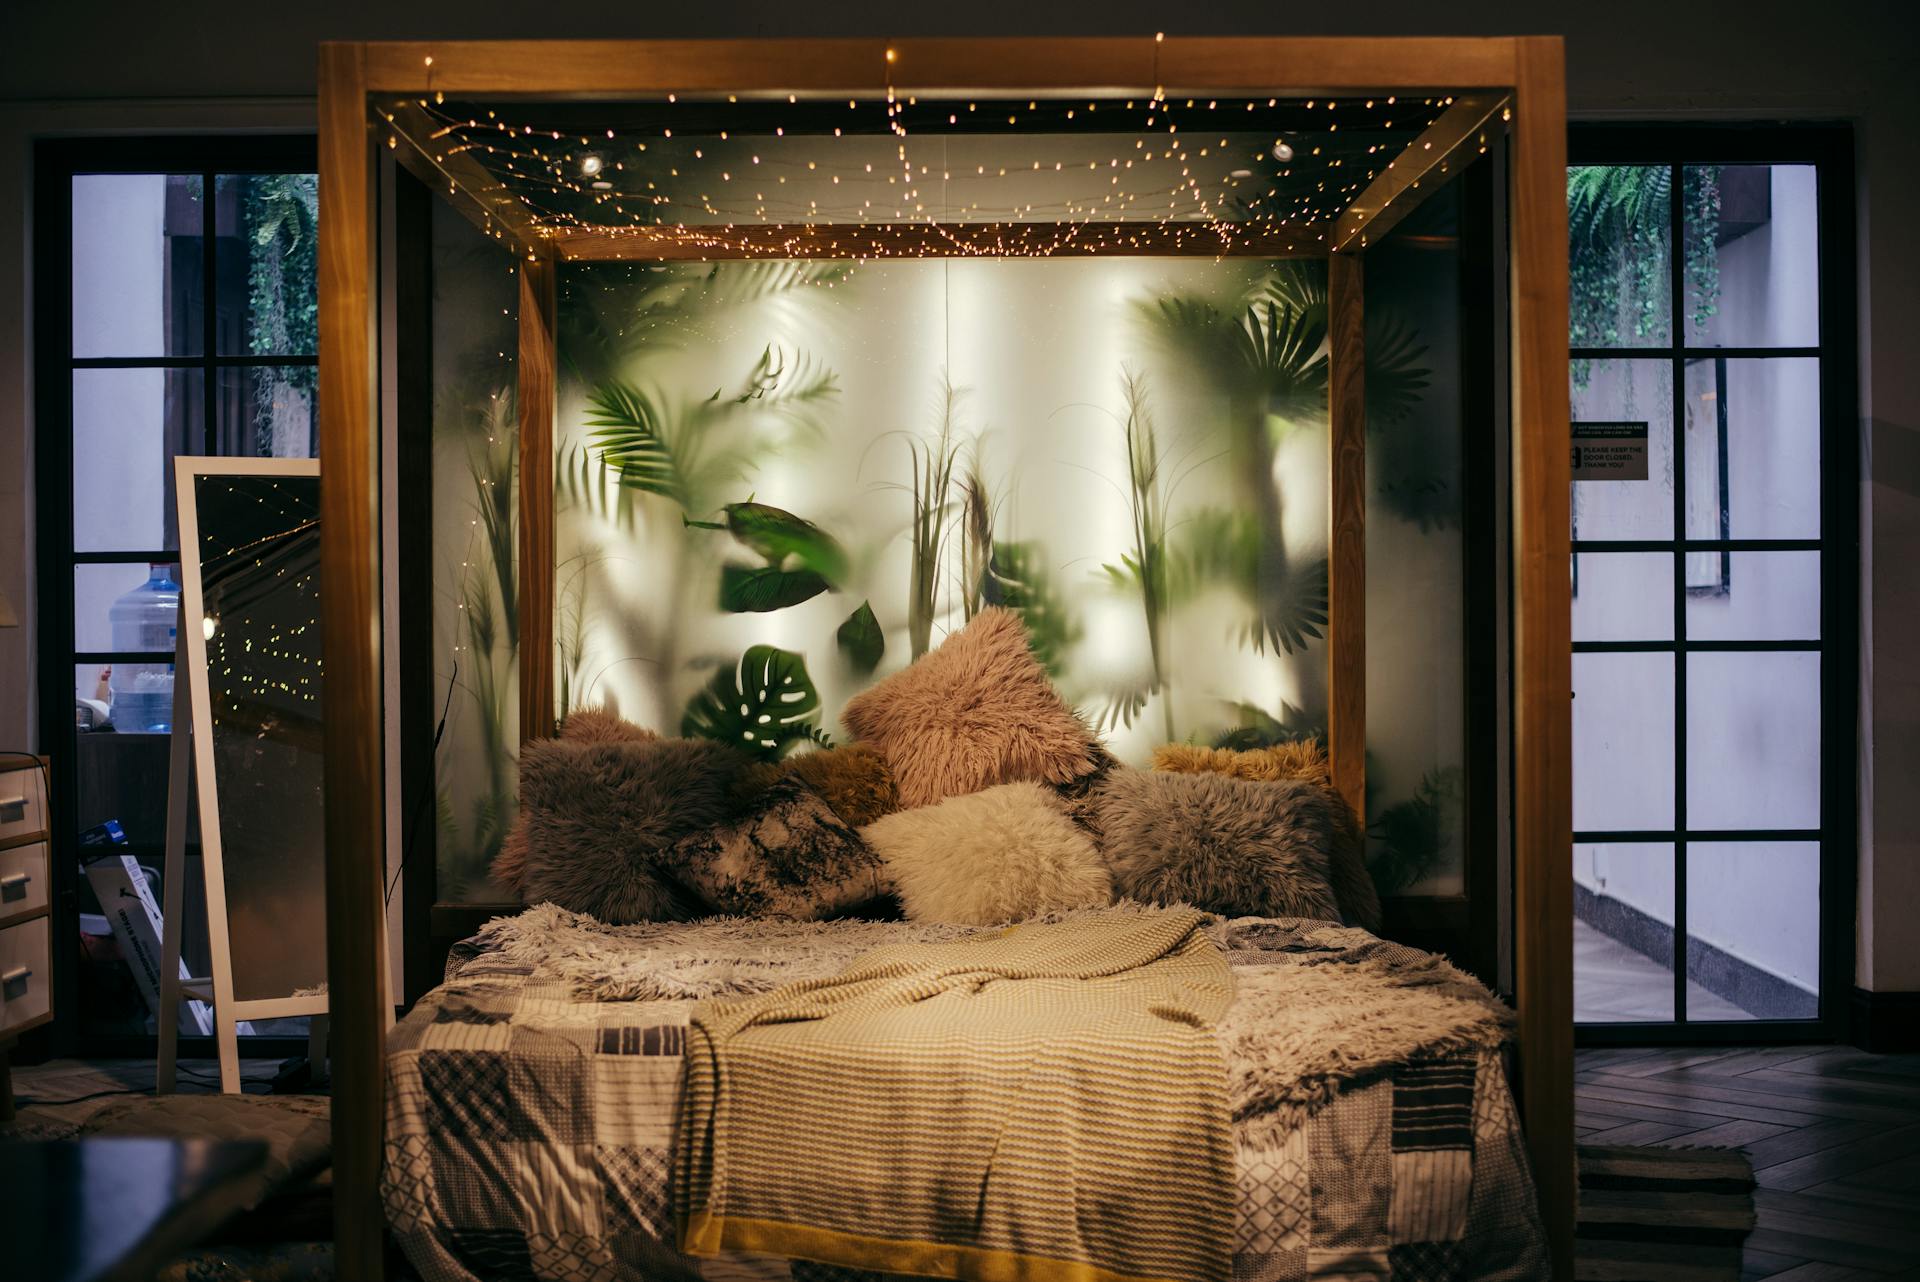 Cozy bedroom with string lights hanging above